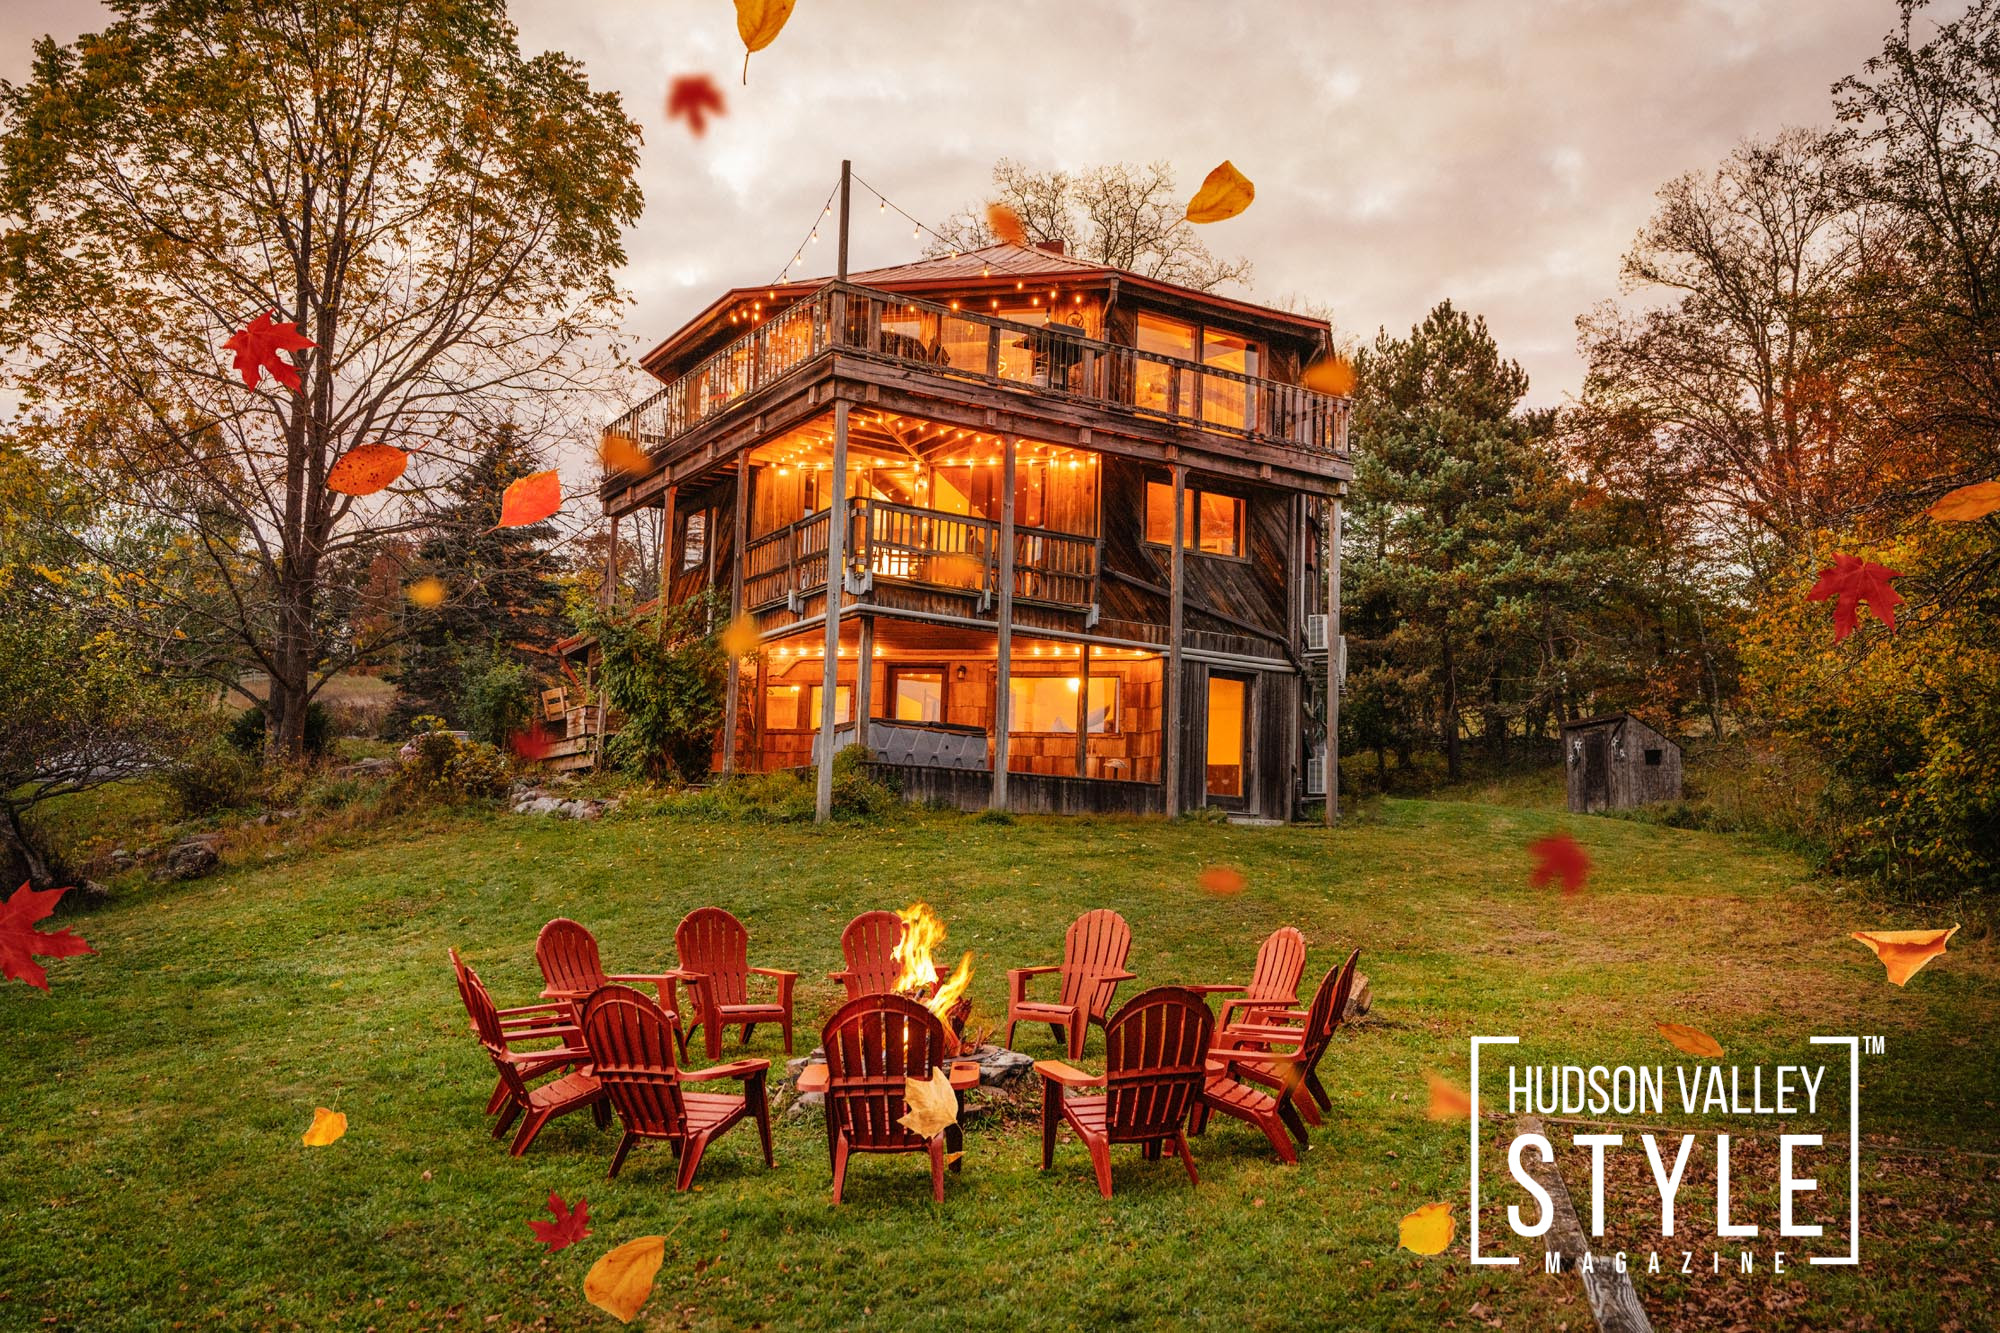 Escape to the Idyllic Rustic Cabin with a Hot Tub in the Catskill Mountains this Fall – Photography by Maxwell Alexander for Alluvion Media – Presented by Alluvion Vacations